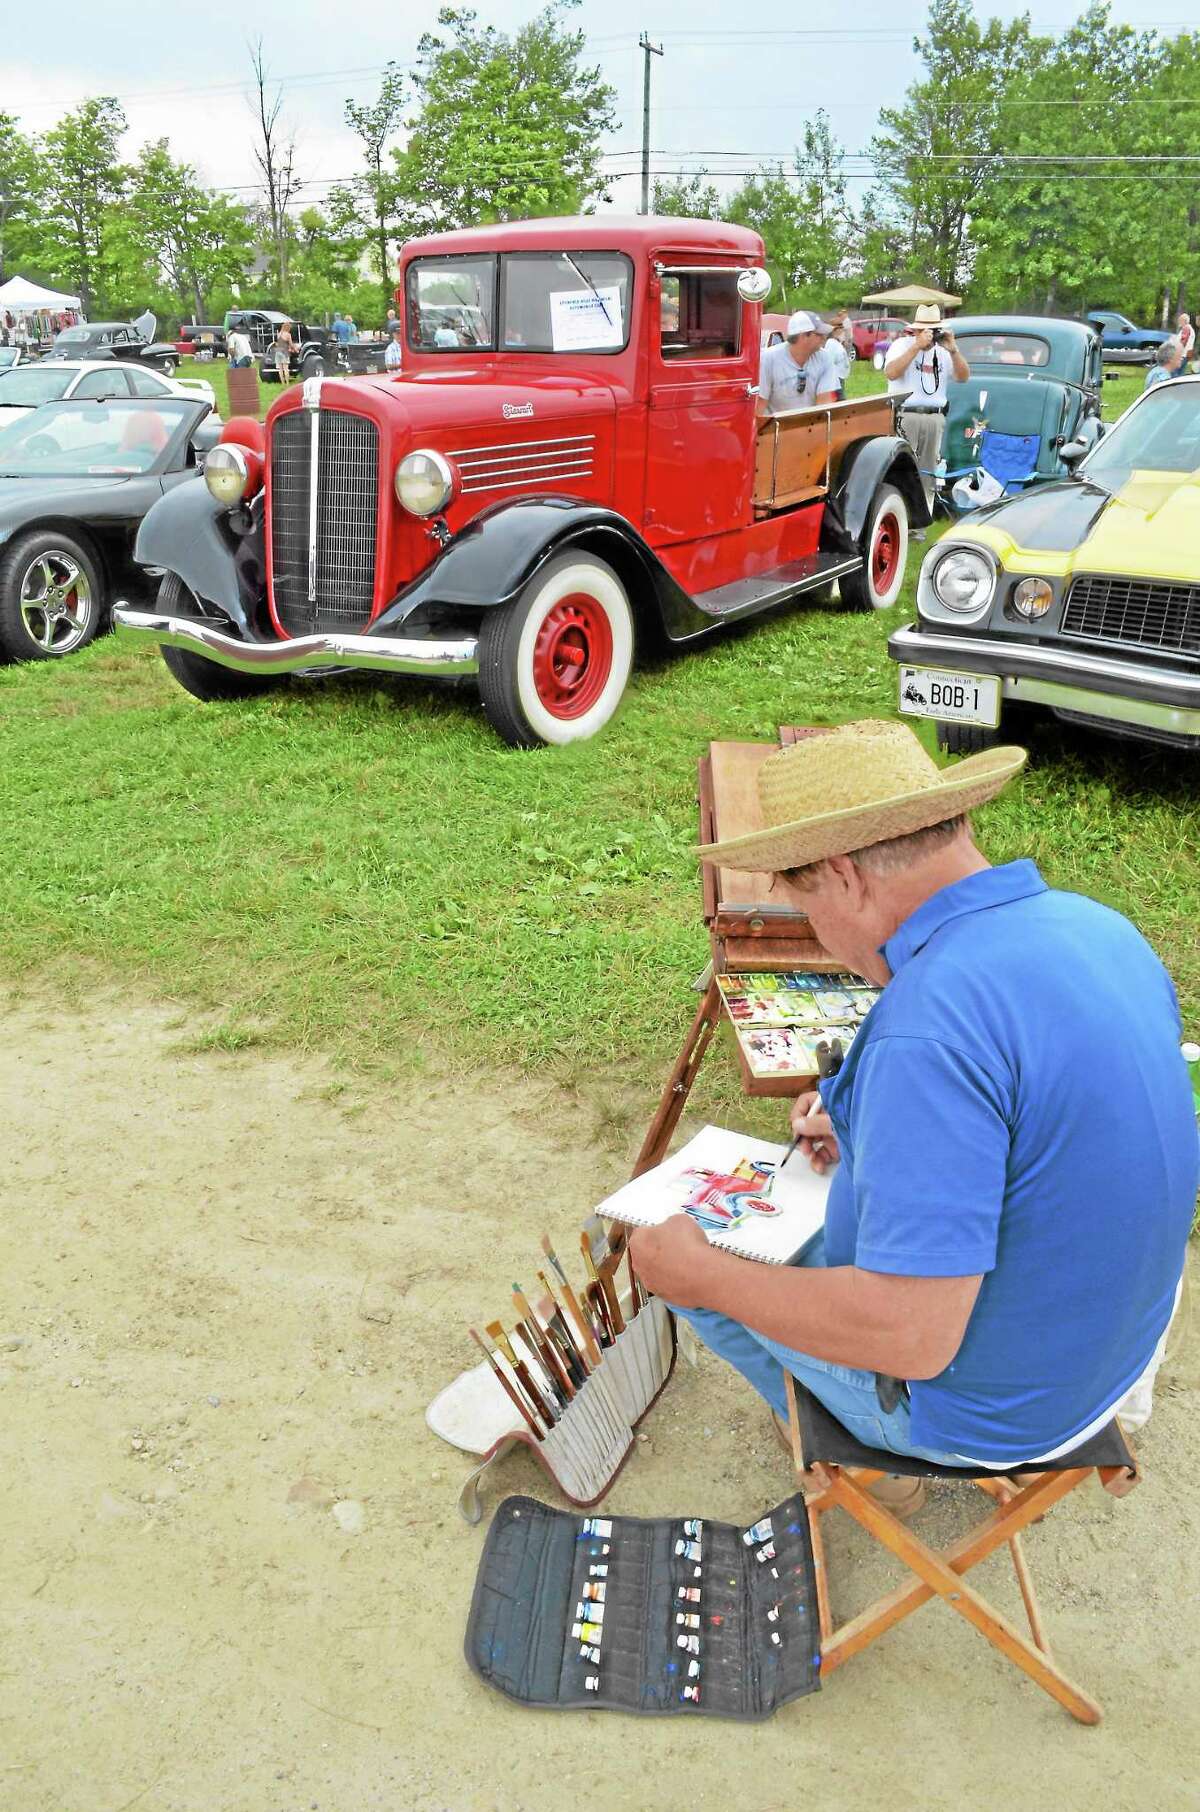 Artist Dan Nichols paints one of the many classic cars on display during the Litchfield Hills Historical Automobile Club’s 38th-annual car show and swap meet at the Goshen Fairgrounds on Sunday, Aug. 18.